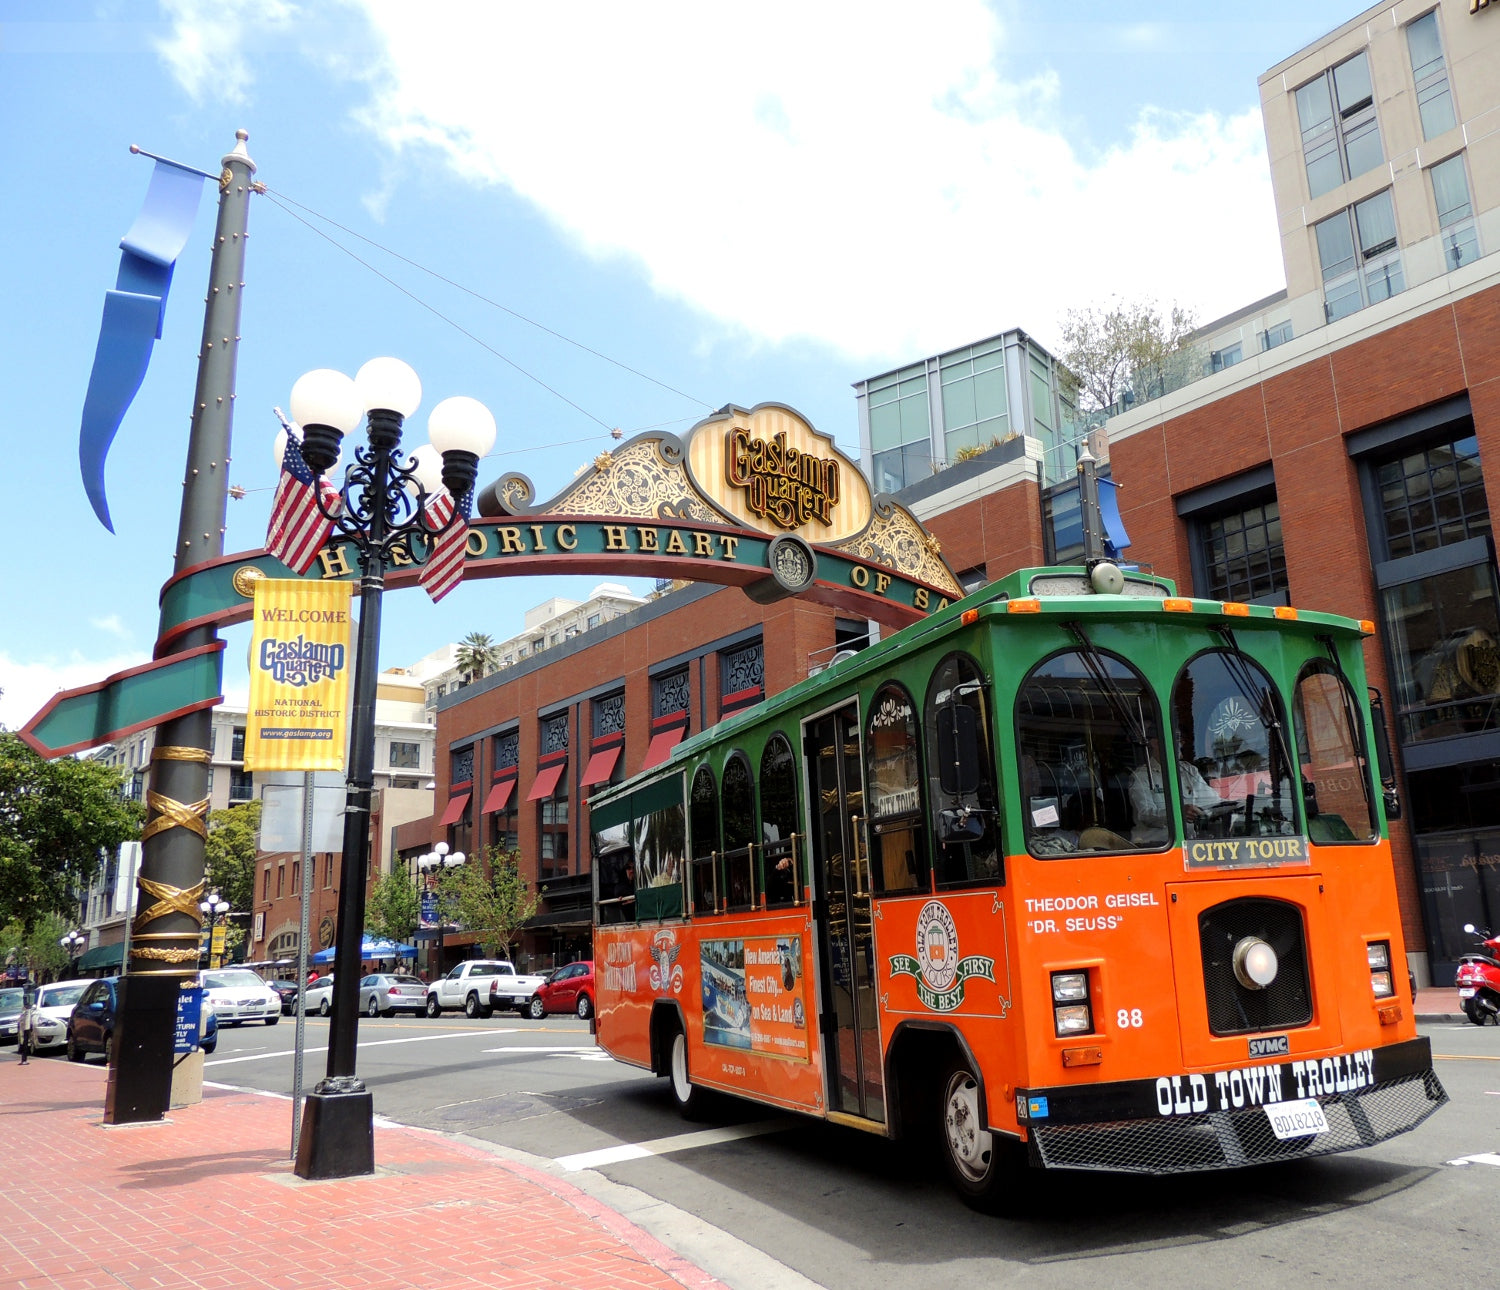 Discover The Historic Heart of San Diego, The Gaslamp Quarter.